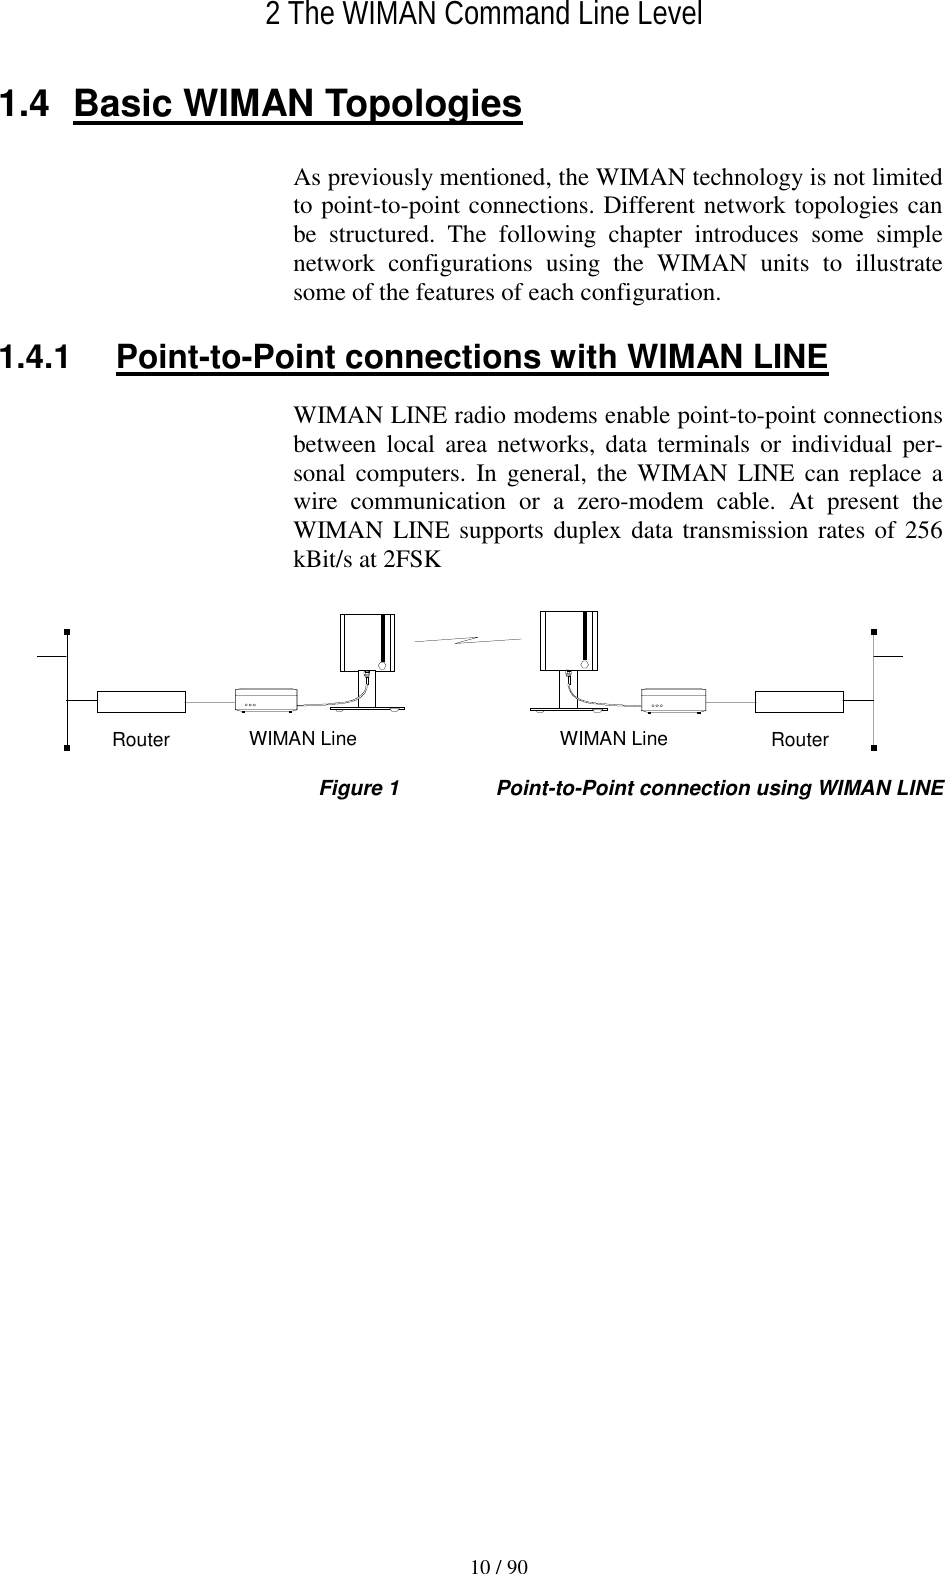   2 The WIMAN Command Line Level 10 / 90 1.4 Basic WIMAN Topologies As previously mentioned, the WIMAN technology is not limited to point-to-point connections. Different network topologies can be structured. The following chapter introduces some simple network configurations using the WIMAN units to illustrate some of the features of each configuration. 1.4.1  Point-to-Point connections with WIMAN LINE WIMAN LINE radio modems enable point-to-point connections between local area networks, data terminals or individual per-sonal computers. In general, the WIMAN LINE can replace a wire communication or a zero-modem cable. At present the WIMAN LINE supports duplex data transmission rates of 256 kBit/s at 2FSK WIMAN LineRouter WIMAN Line Router  Figure 1  Point-to-Point connection using WIMAN LINE 